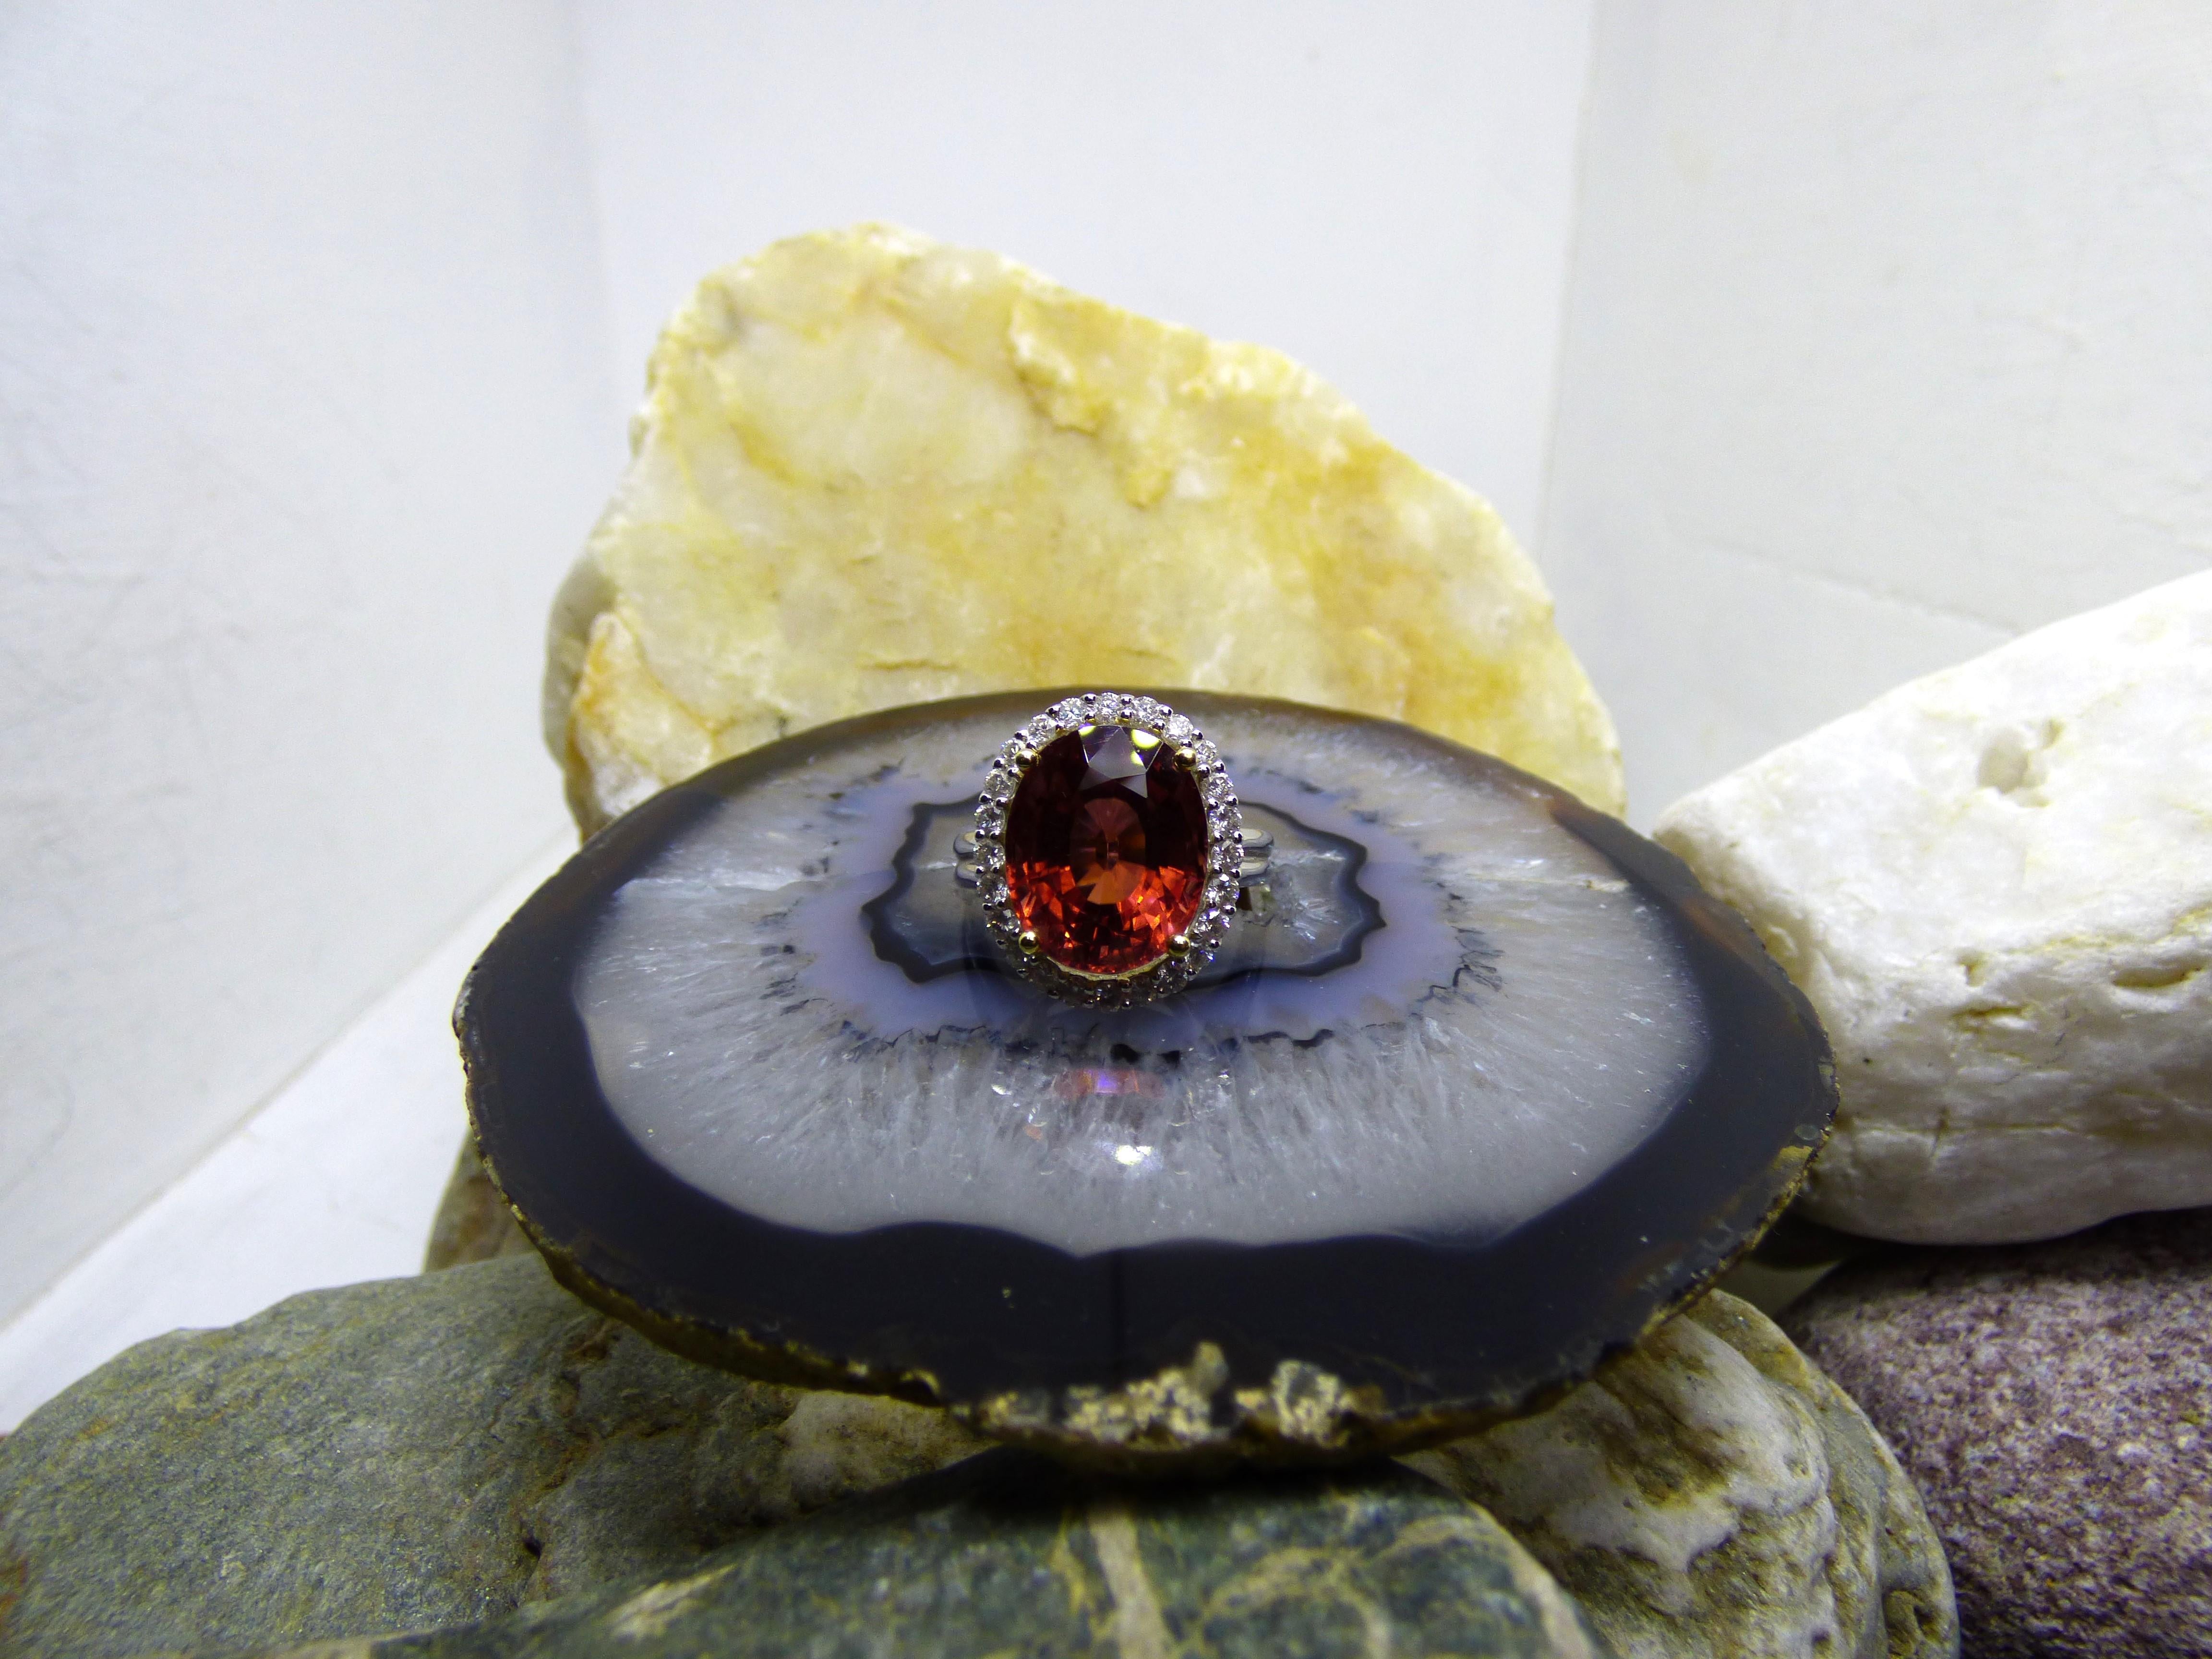 An unusual colour of Pink Tourmaline makes this ring stand out.  There are browns in this pink 7.2ct Tourmaline. The oval faceted stone is 15X9mm. It is surrounded by 24 Diamonds with a total Diamond weight of .50ct. The ring is handmade in 18K